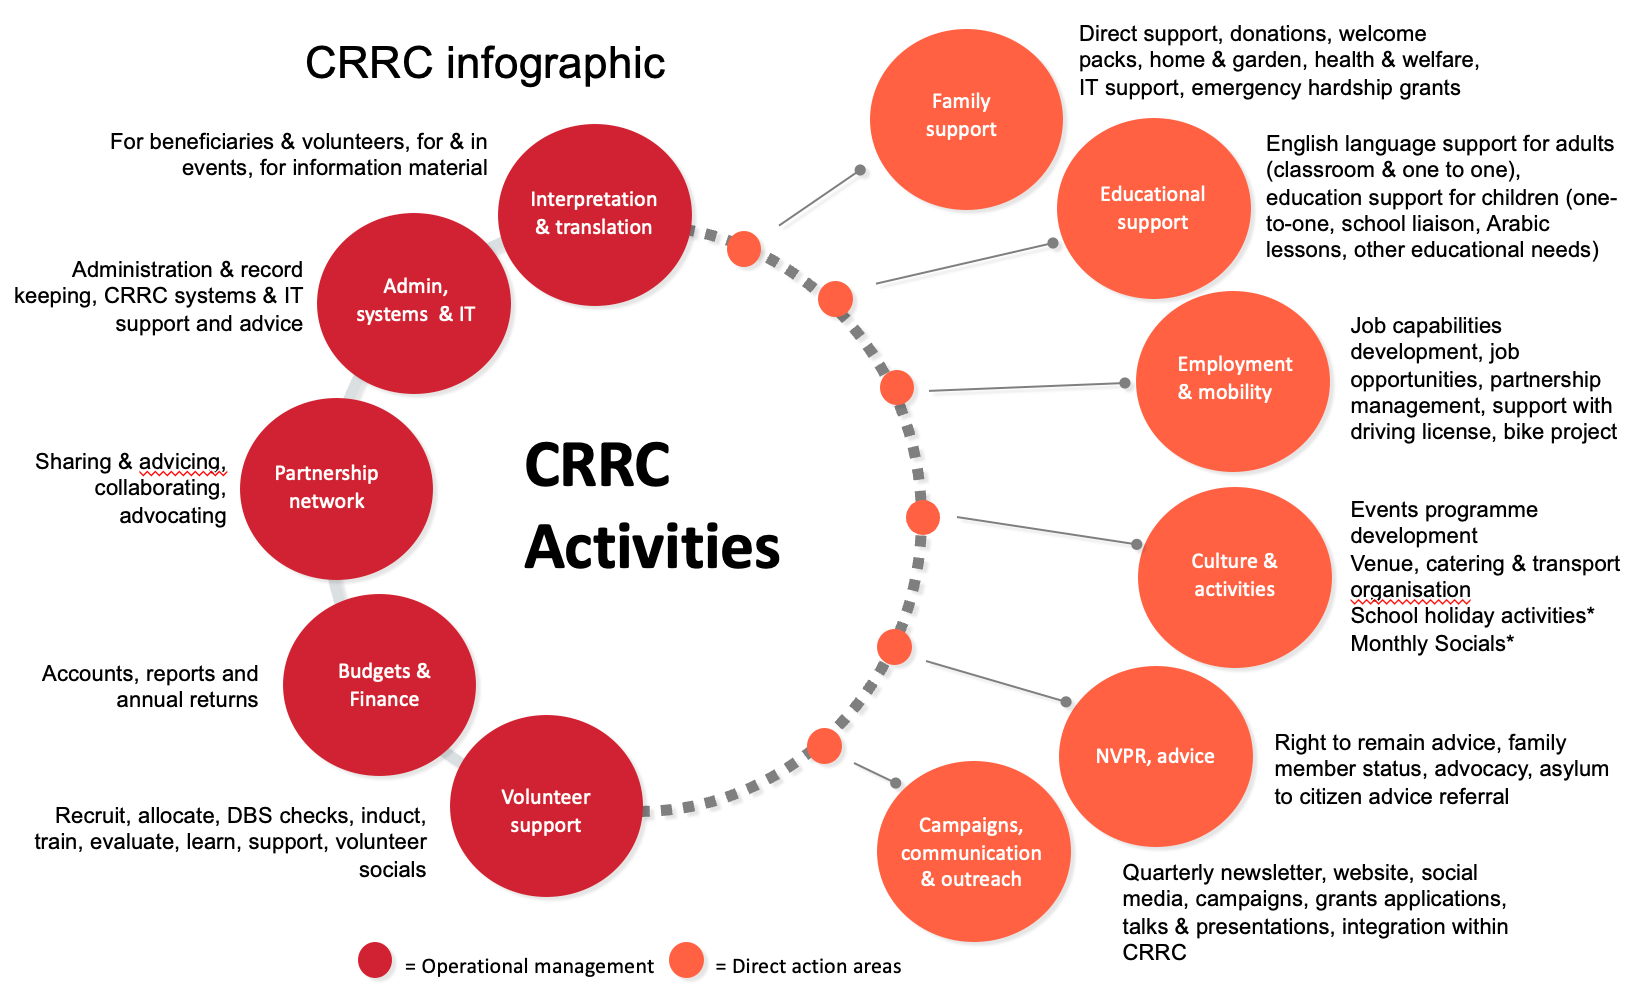 Bubble chart showing different aspects of CRRC's work, covering family support, educational support, employment and mobility, culture and activities, NVPR and advice, and campaigning, communication and outreach, as well as internal administration.